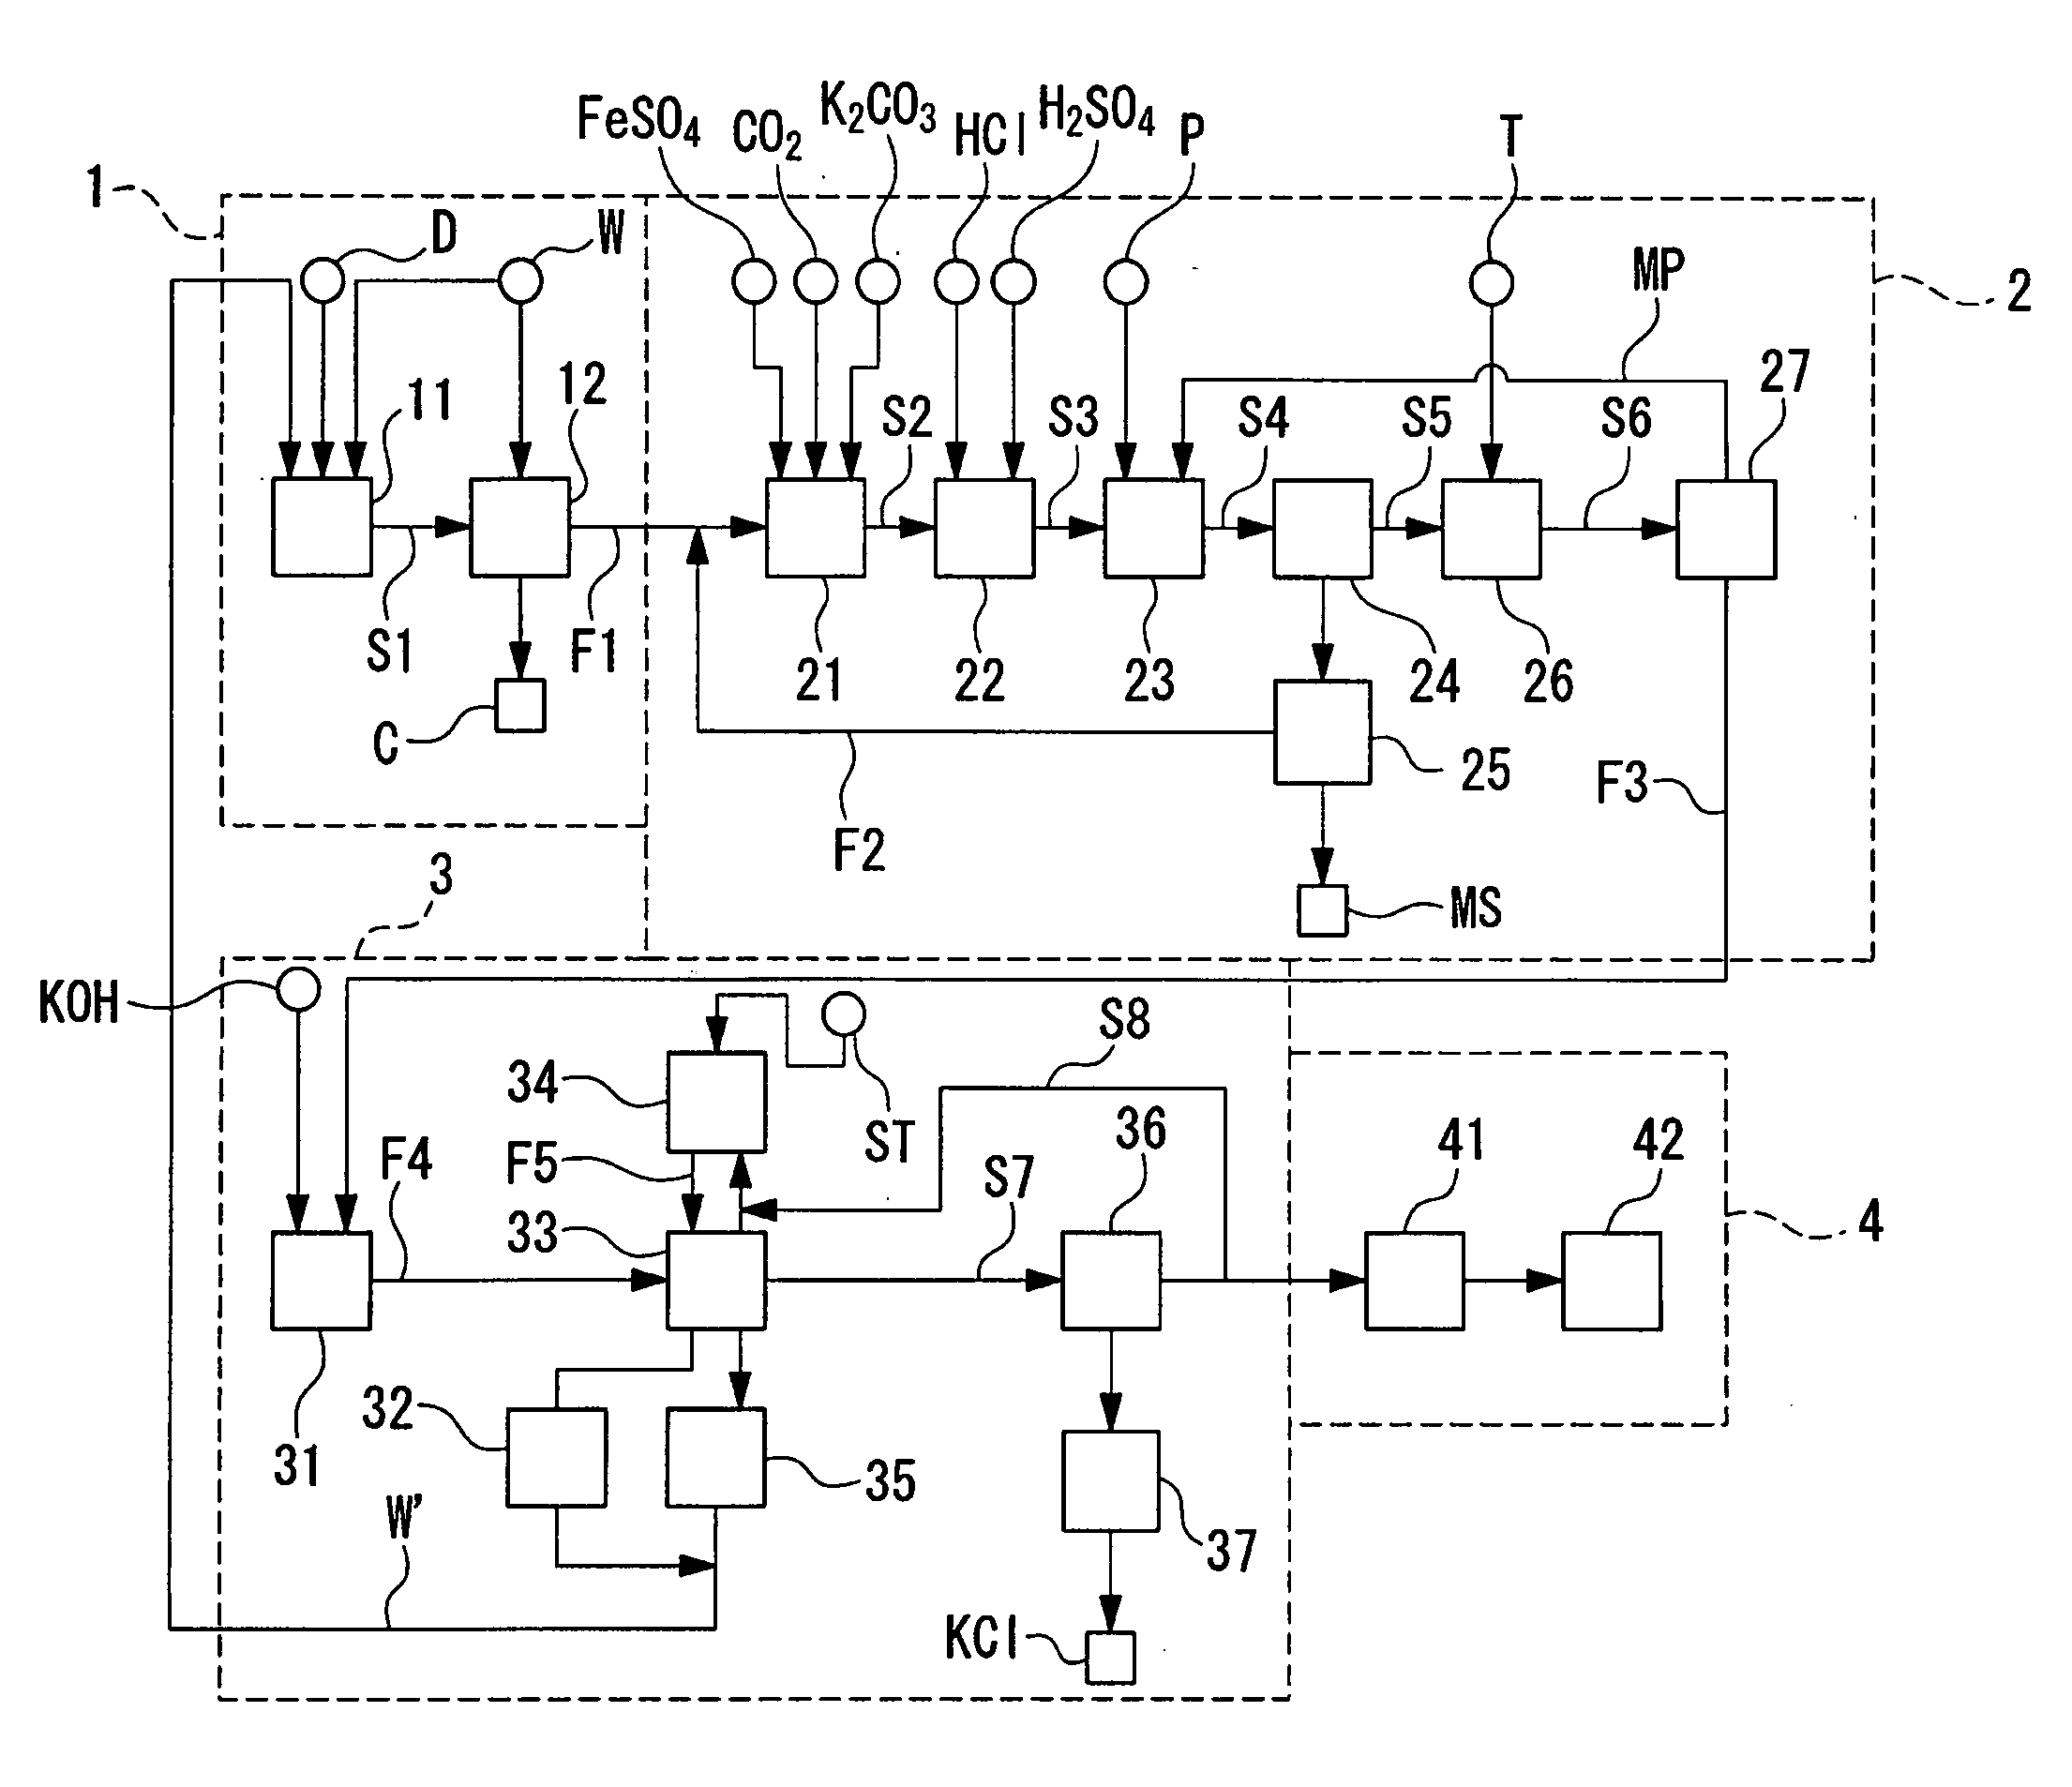 Method of and Apparatus for Treating Chlorine-Containing Waste